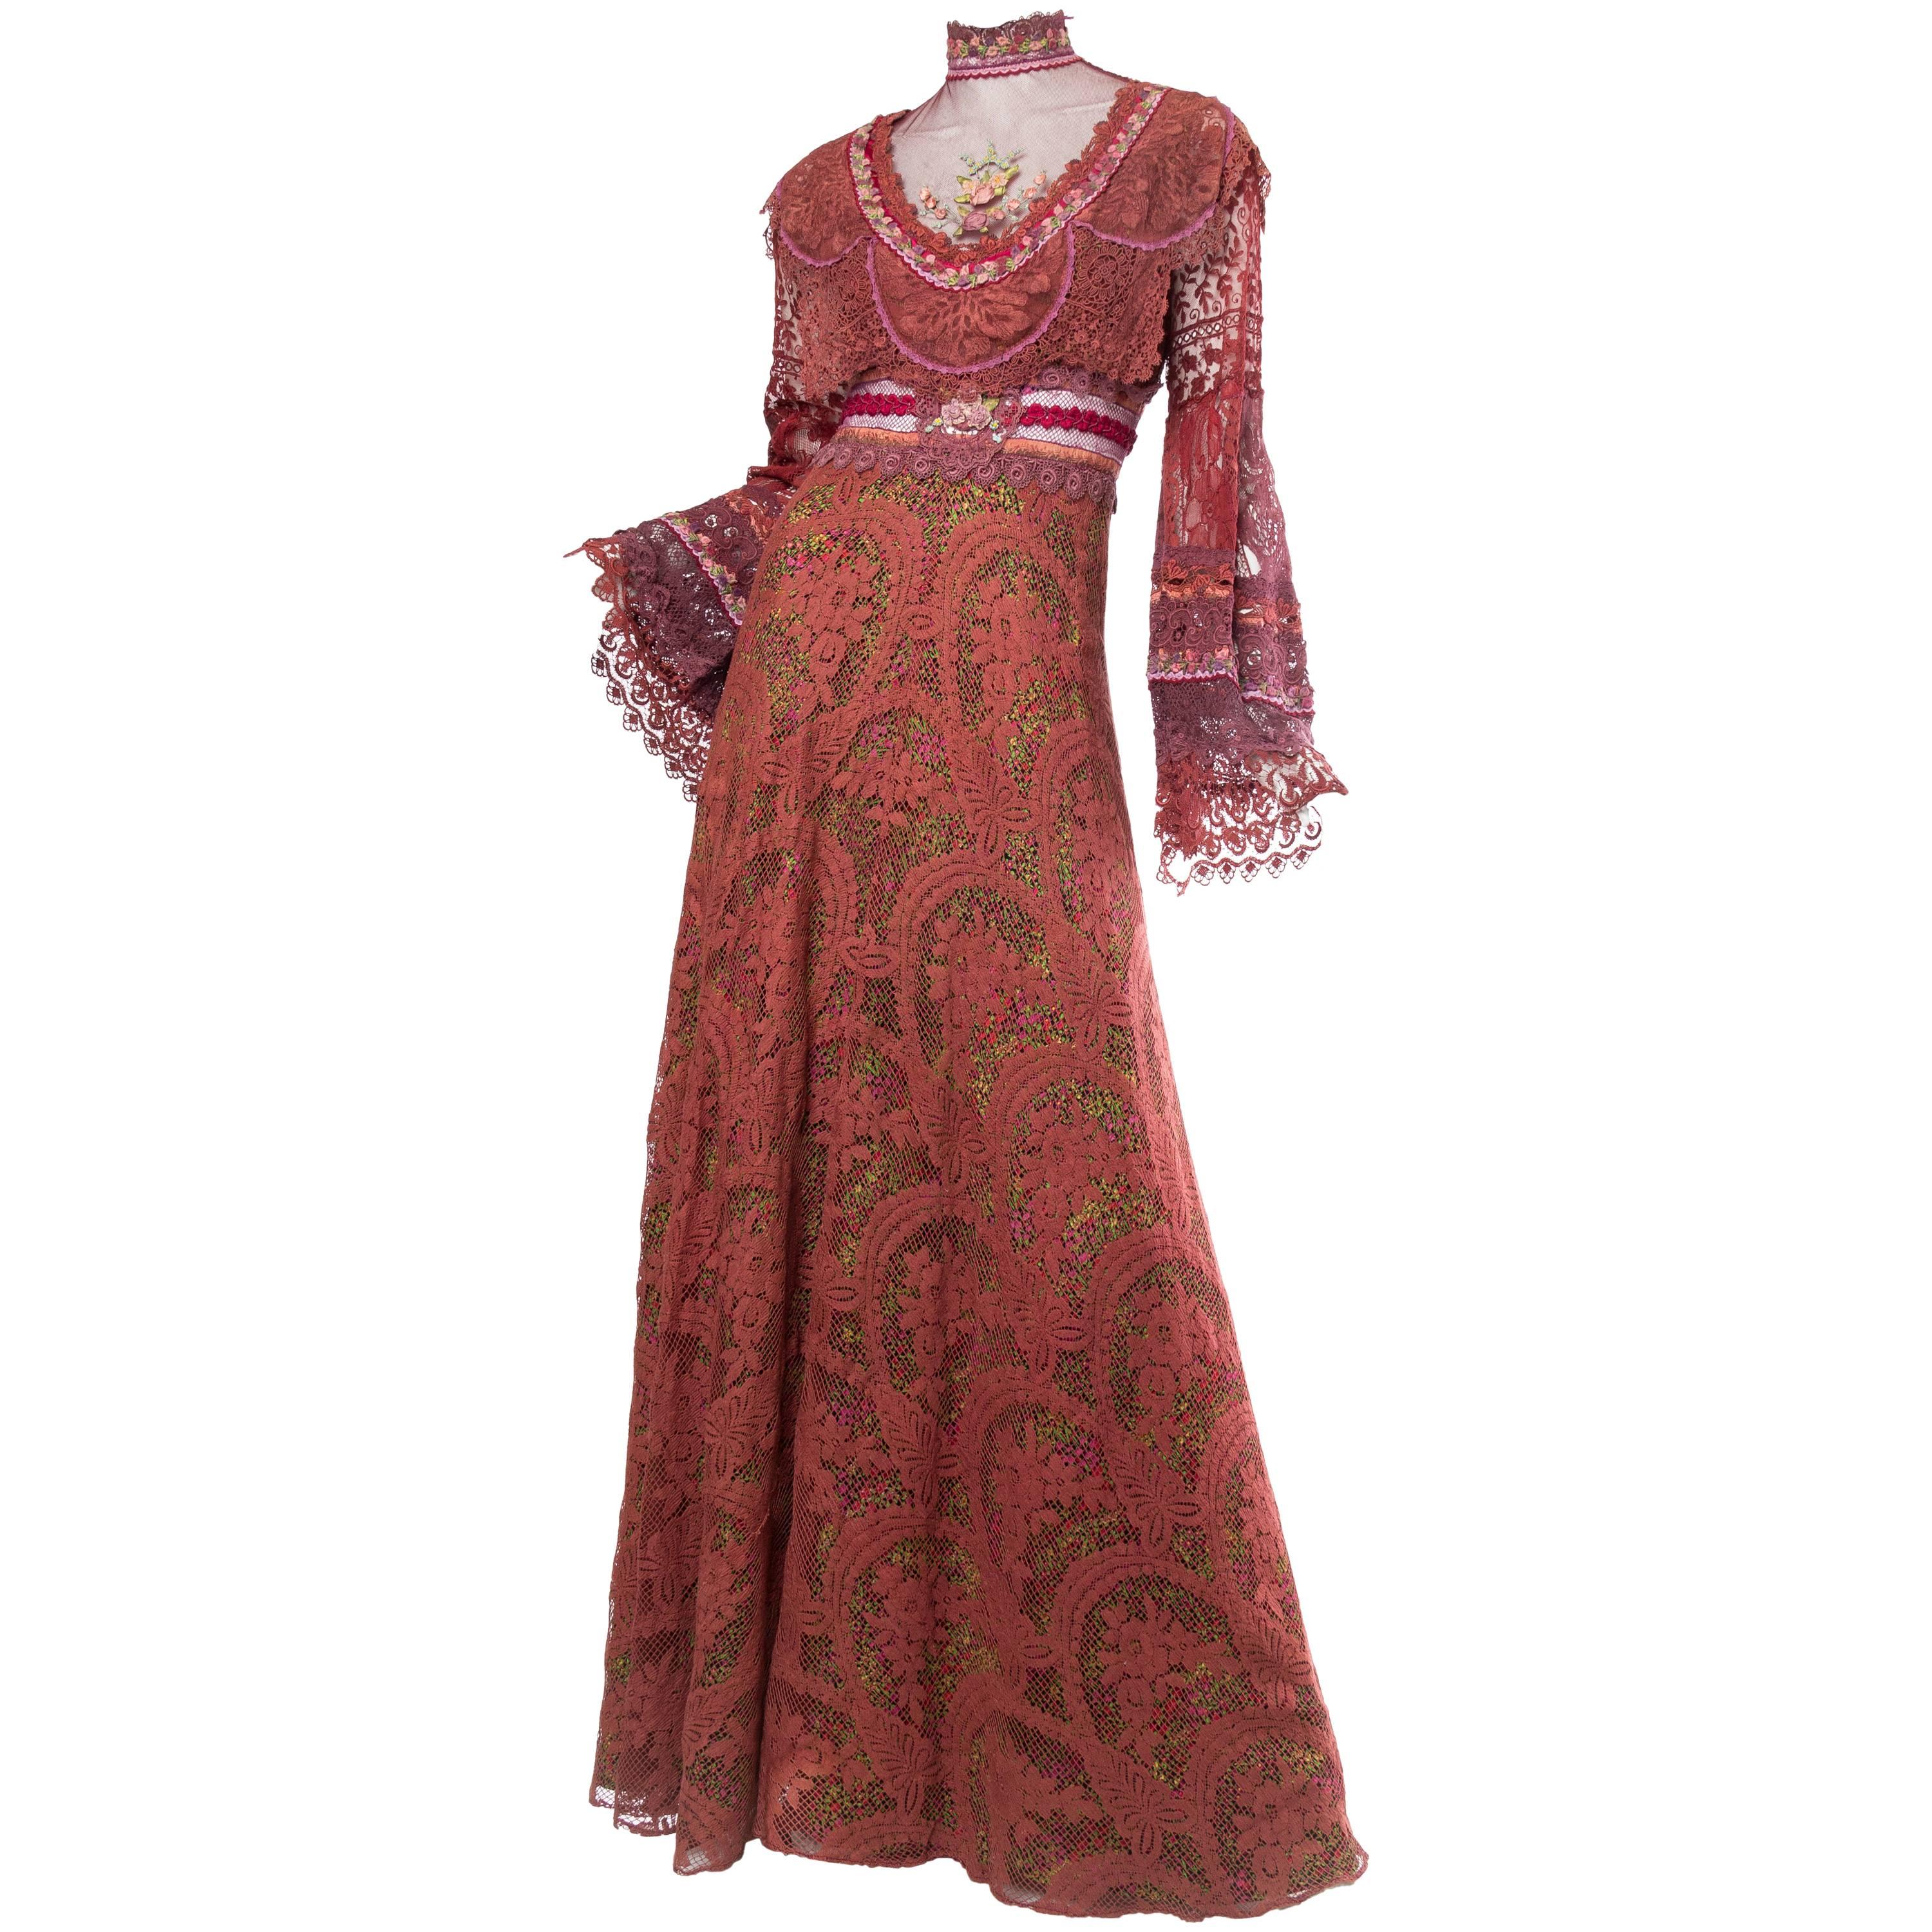 1970s Boho Dress made from Hand-dyed Antique Laces